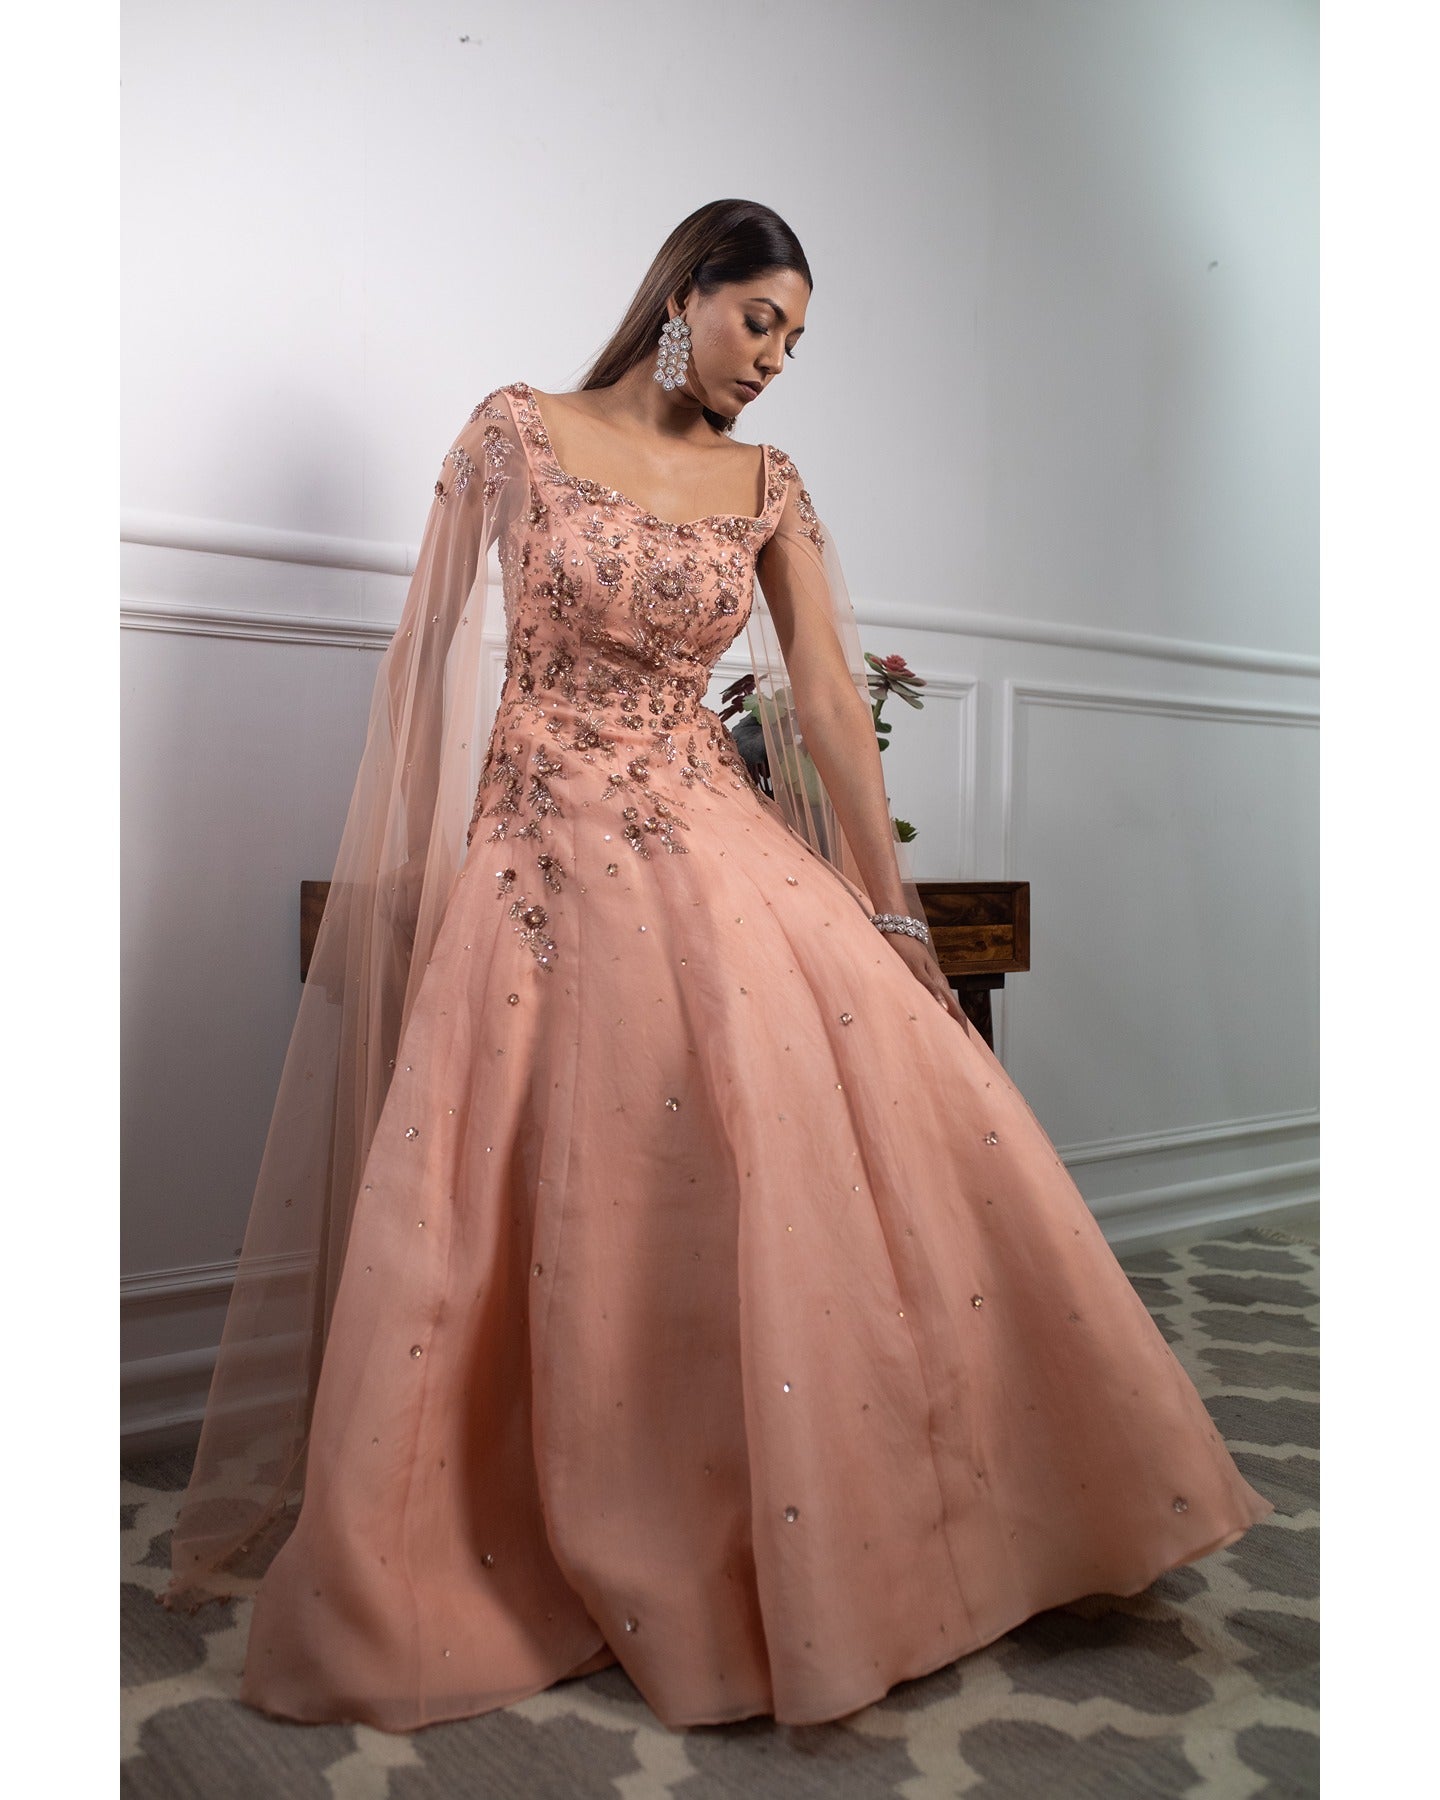 Draped in the soft radiance of peach, this gown whispers elegance and timeless charm.